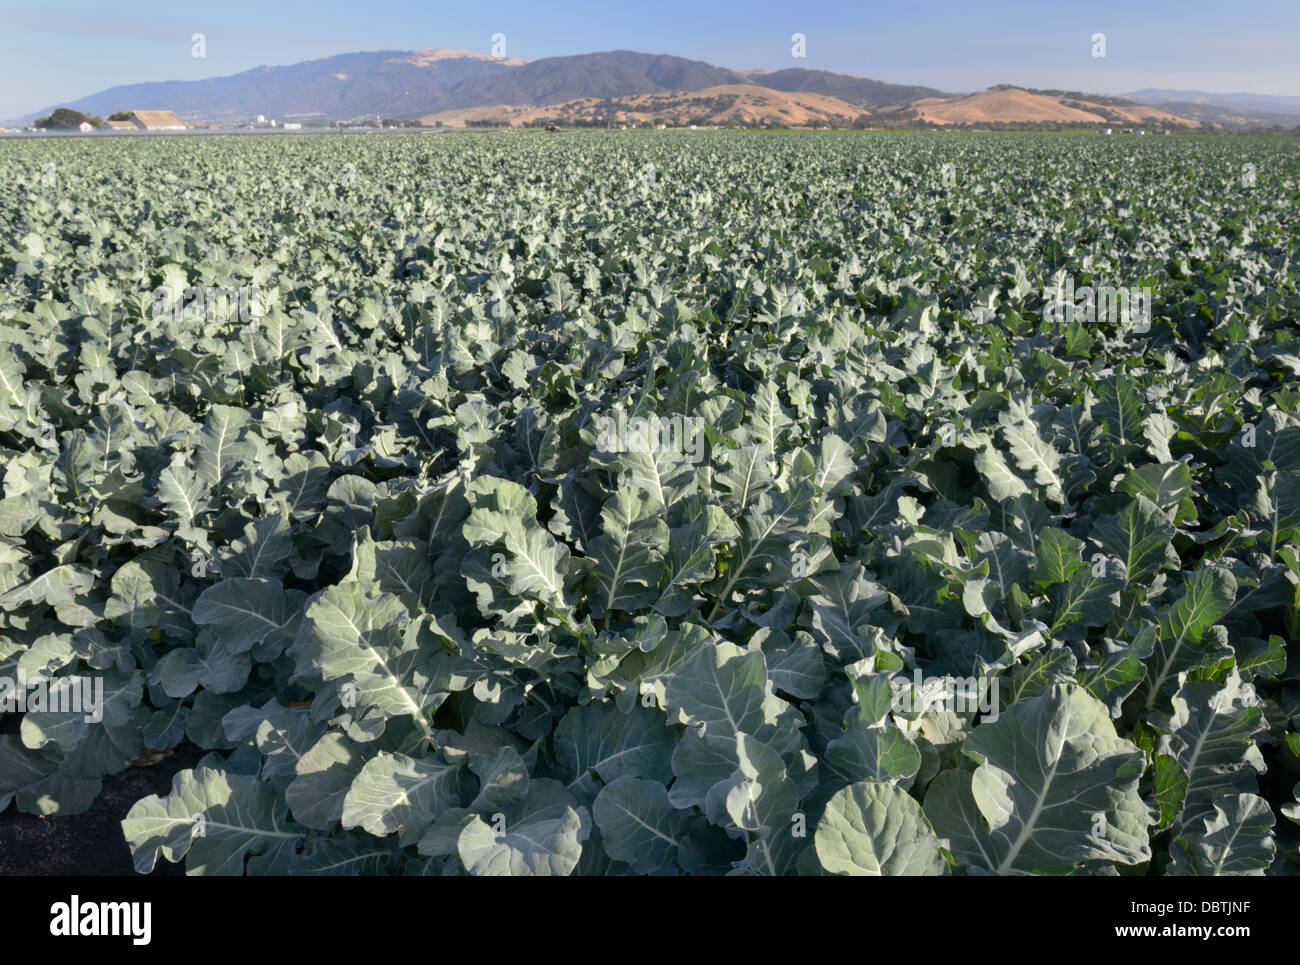 Champ Kale, Salinas Valley, central CA Banque D'Images